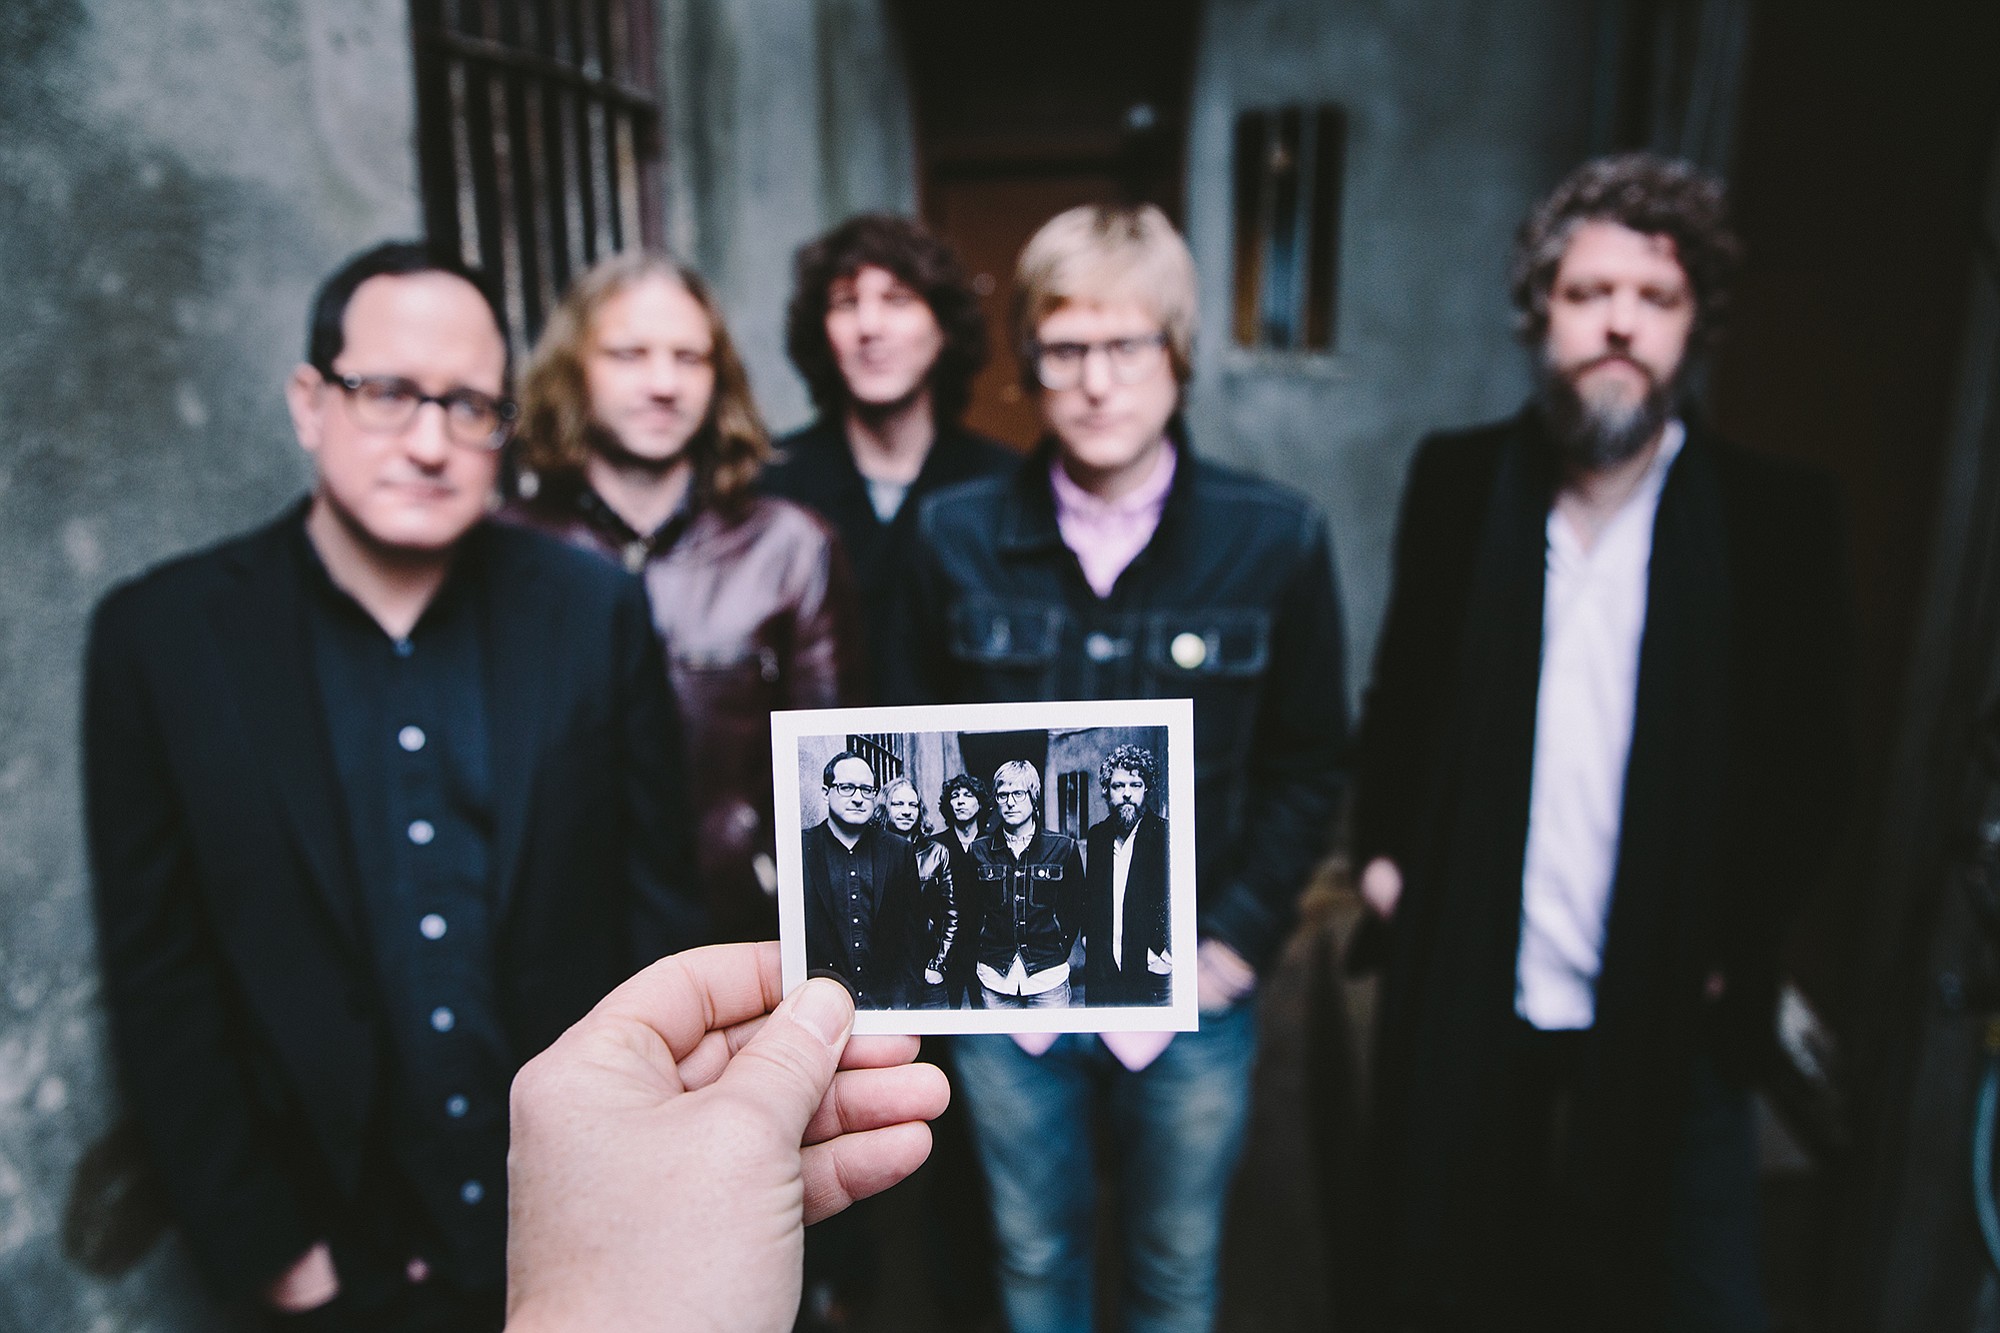 Danny Clinch
The Hold Steady will perform July 17 at the Wonder Ballroom in Portland.